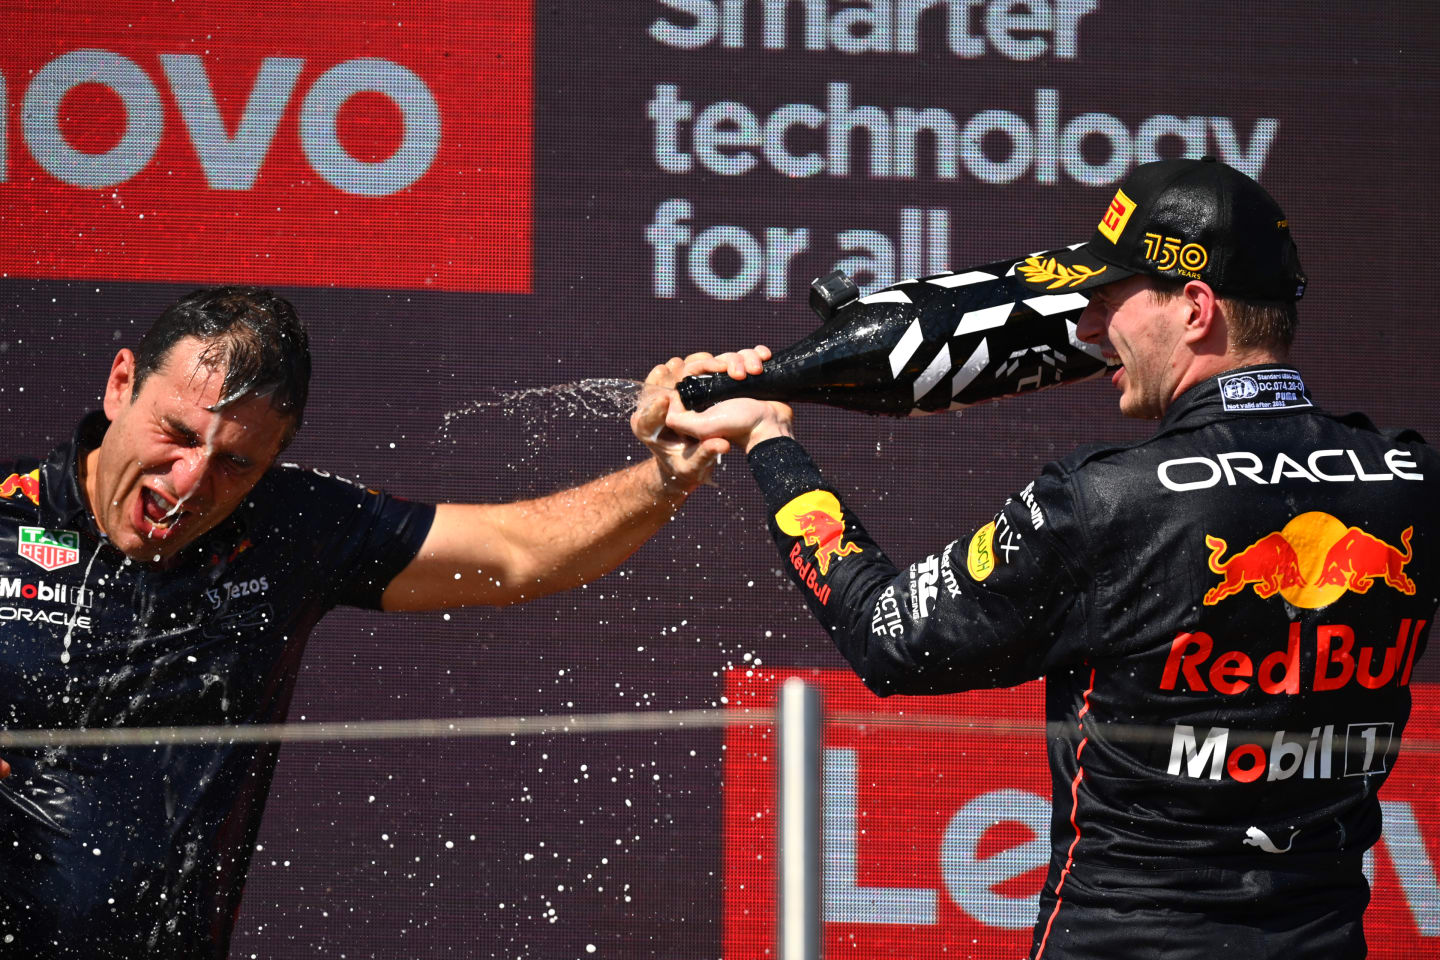 LE CASTELLET, FRANCE - JULY 24: Race winner Max Verstappen of the Netherlands and Oracle Red Bull Racing and Pierre Wache, Chief Engineer of Performance Engineering at Red Bull Racing celebrate on the podium during the F1 Grand Prix of France at Circuit Paul Ricard on July 24, 2022 in Le Castellet, France. (Photo by Dan Mullan/Getty Images)